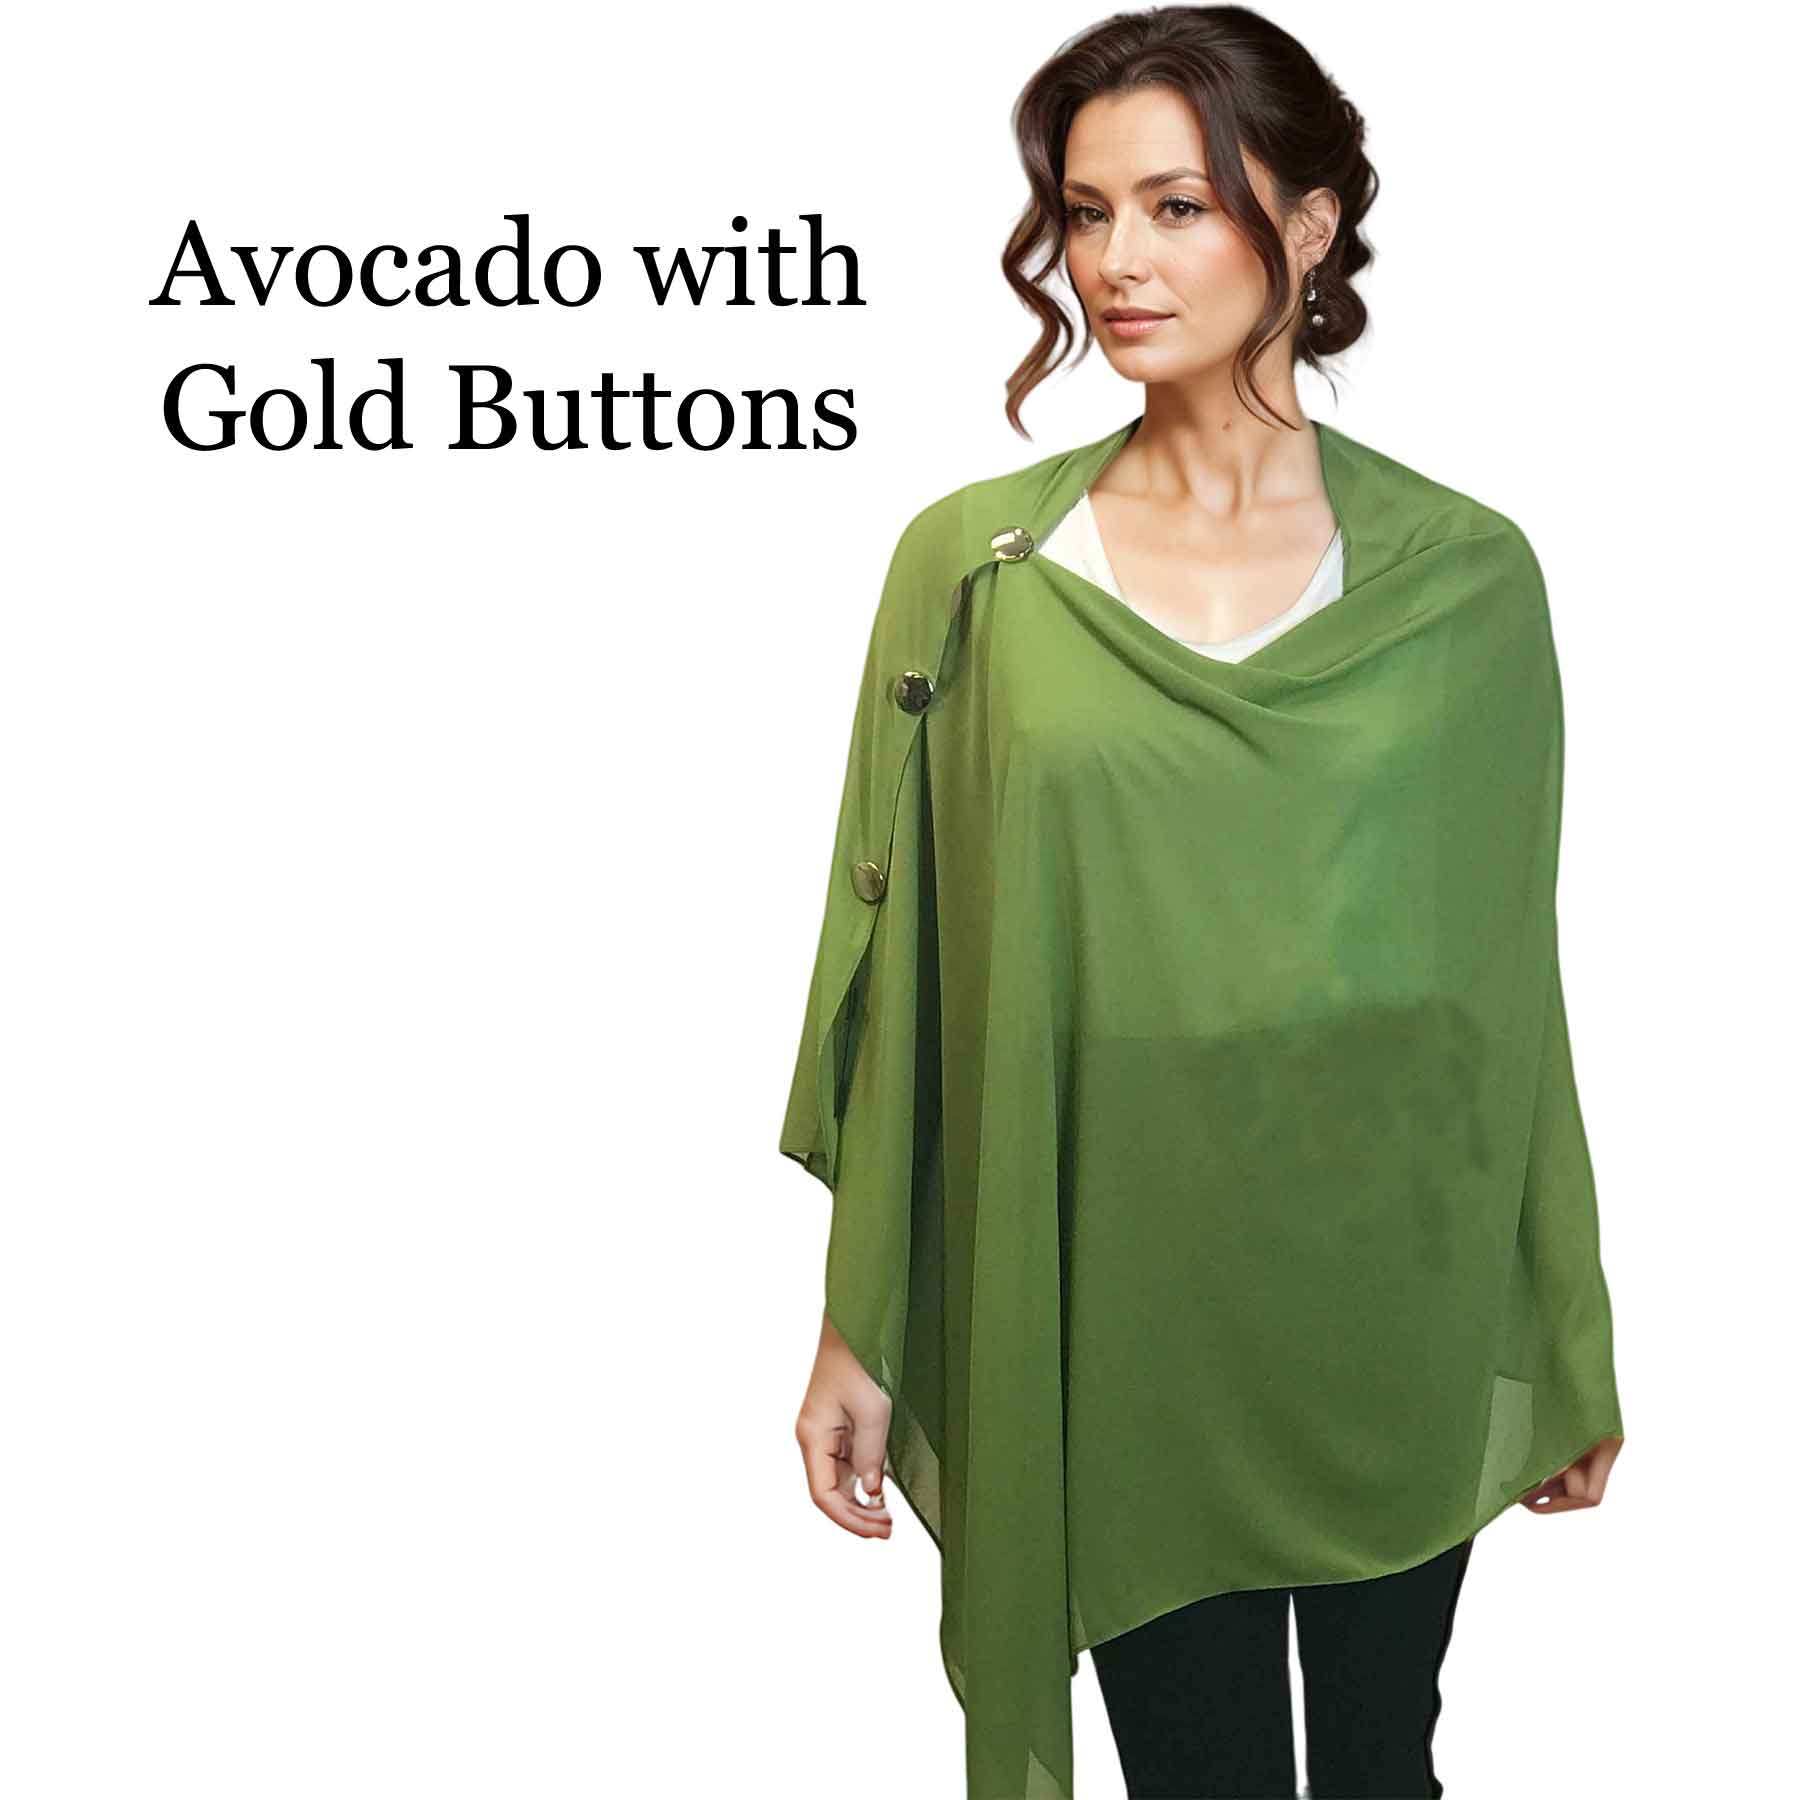 038G - Avocado w/Gold Buttons<br>
Georgette Button Shawl

